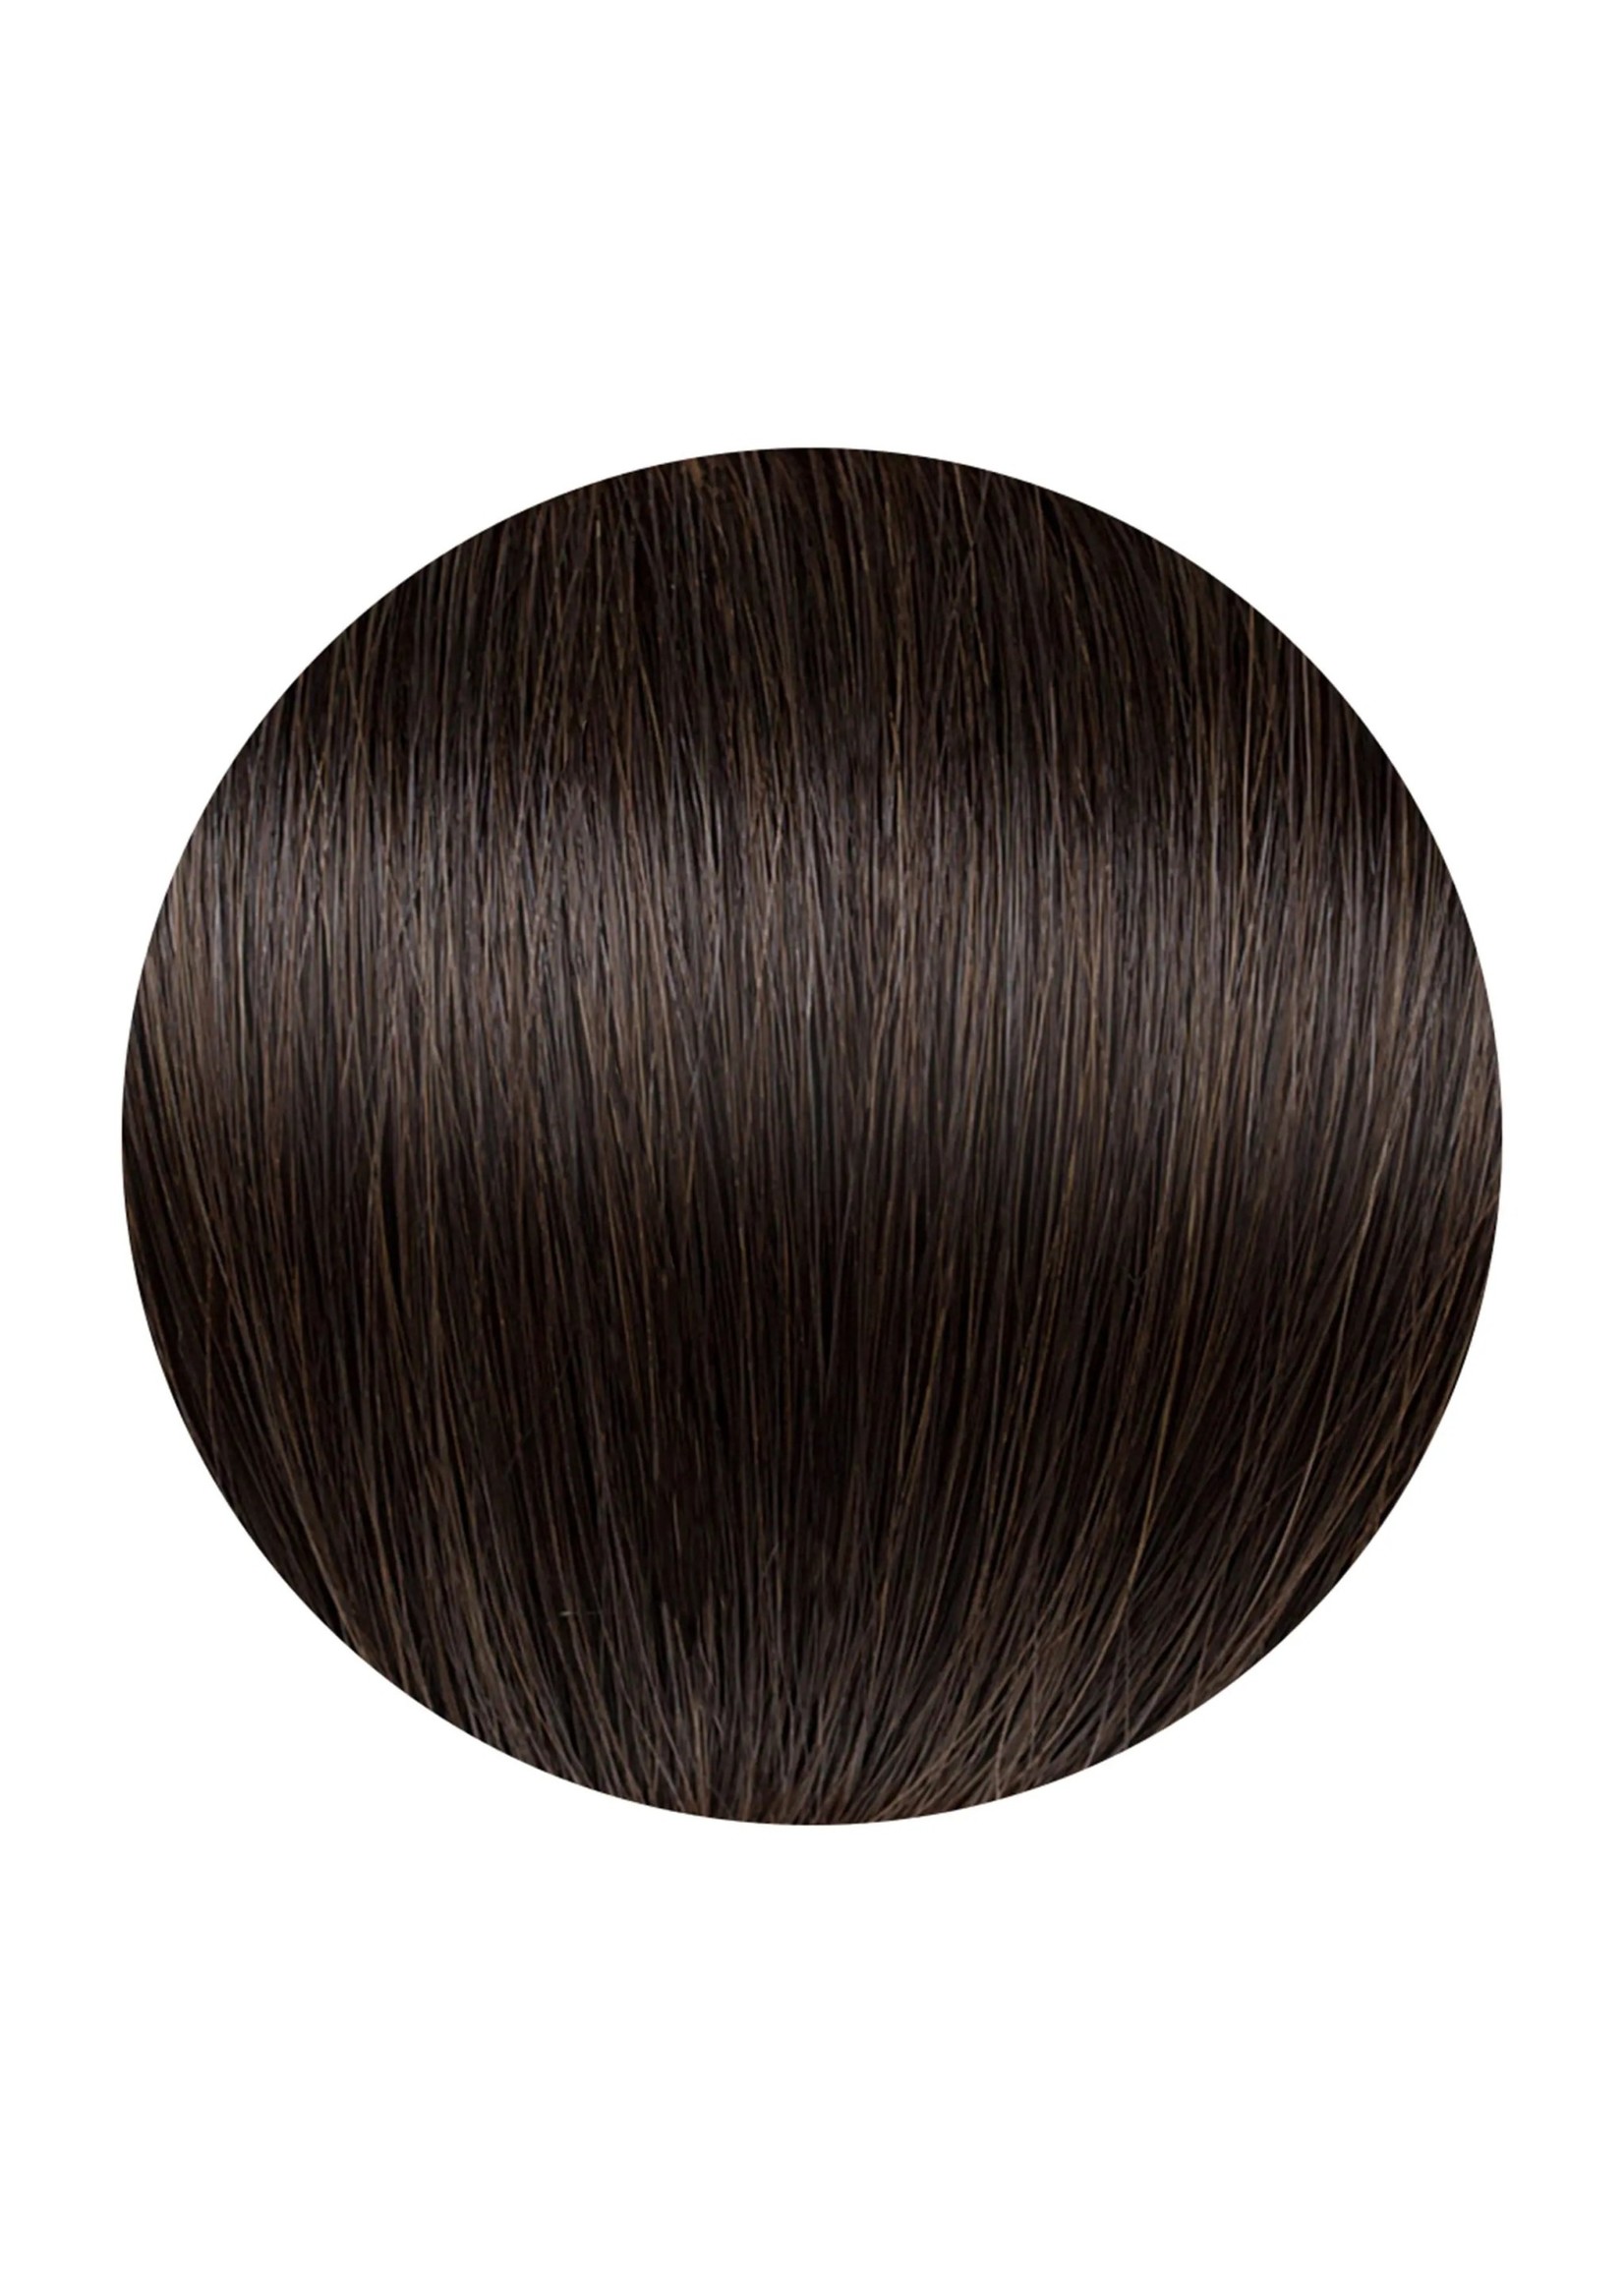 Seamless1 Seamless1 Human Hair Clip-in 1pc Hair Extensions 21.5 Inches - Ritzy